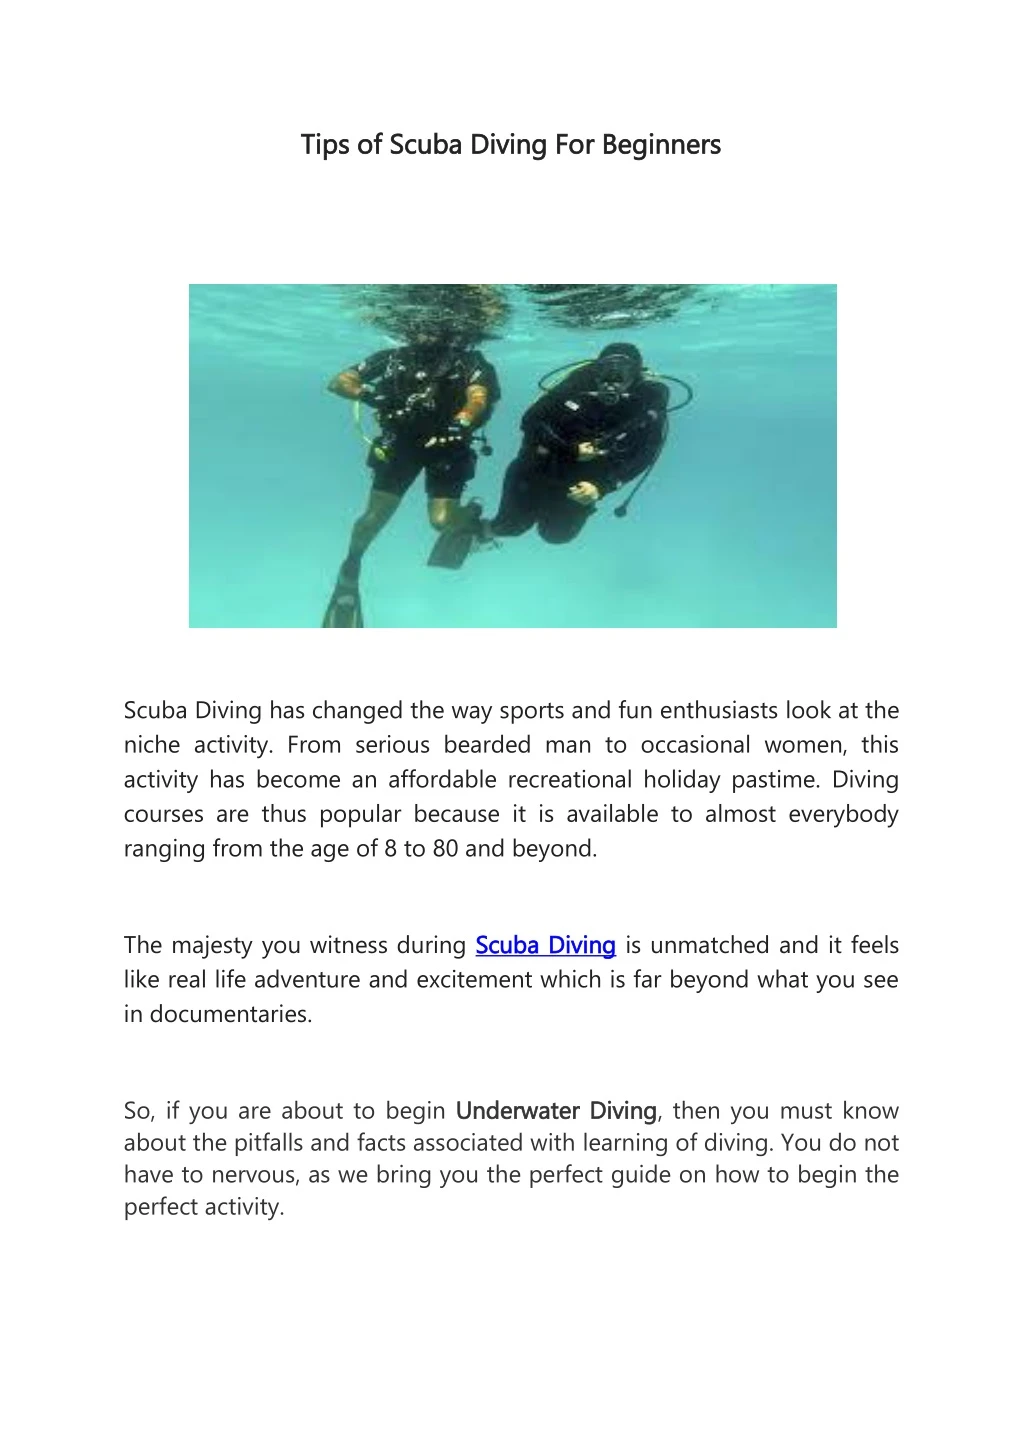 tips of scuba diving for beginners tips of scuba